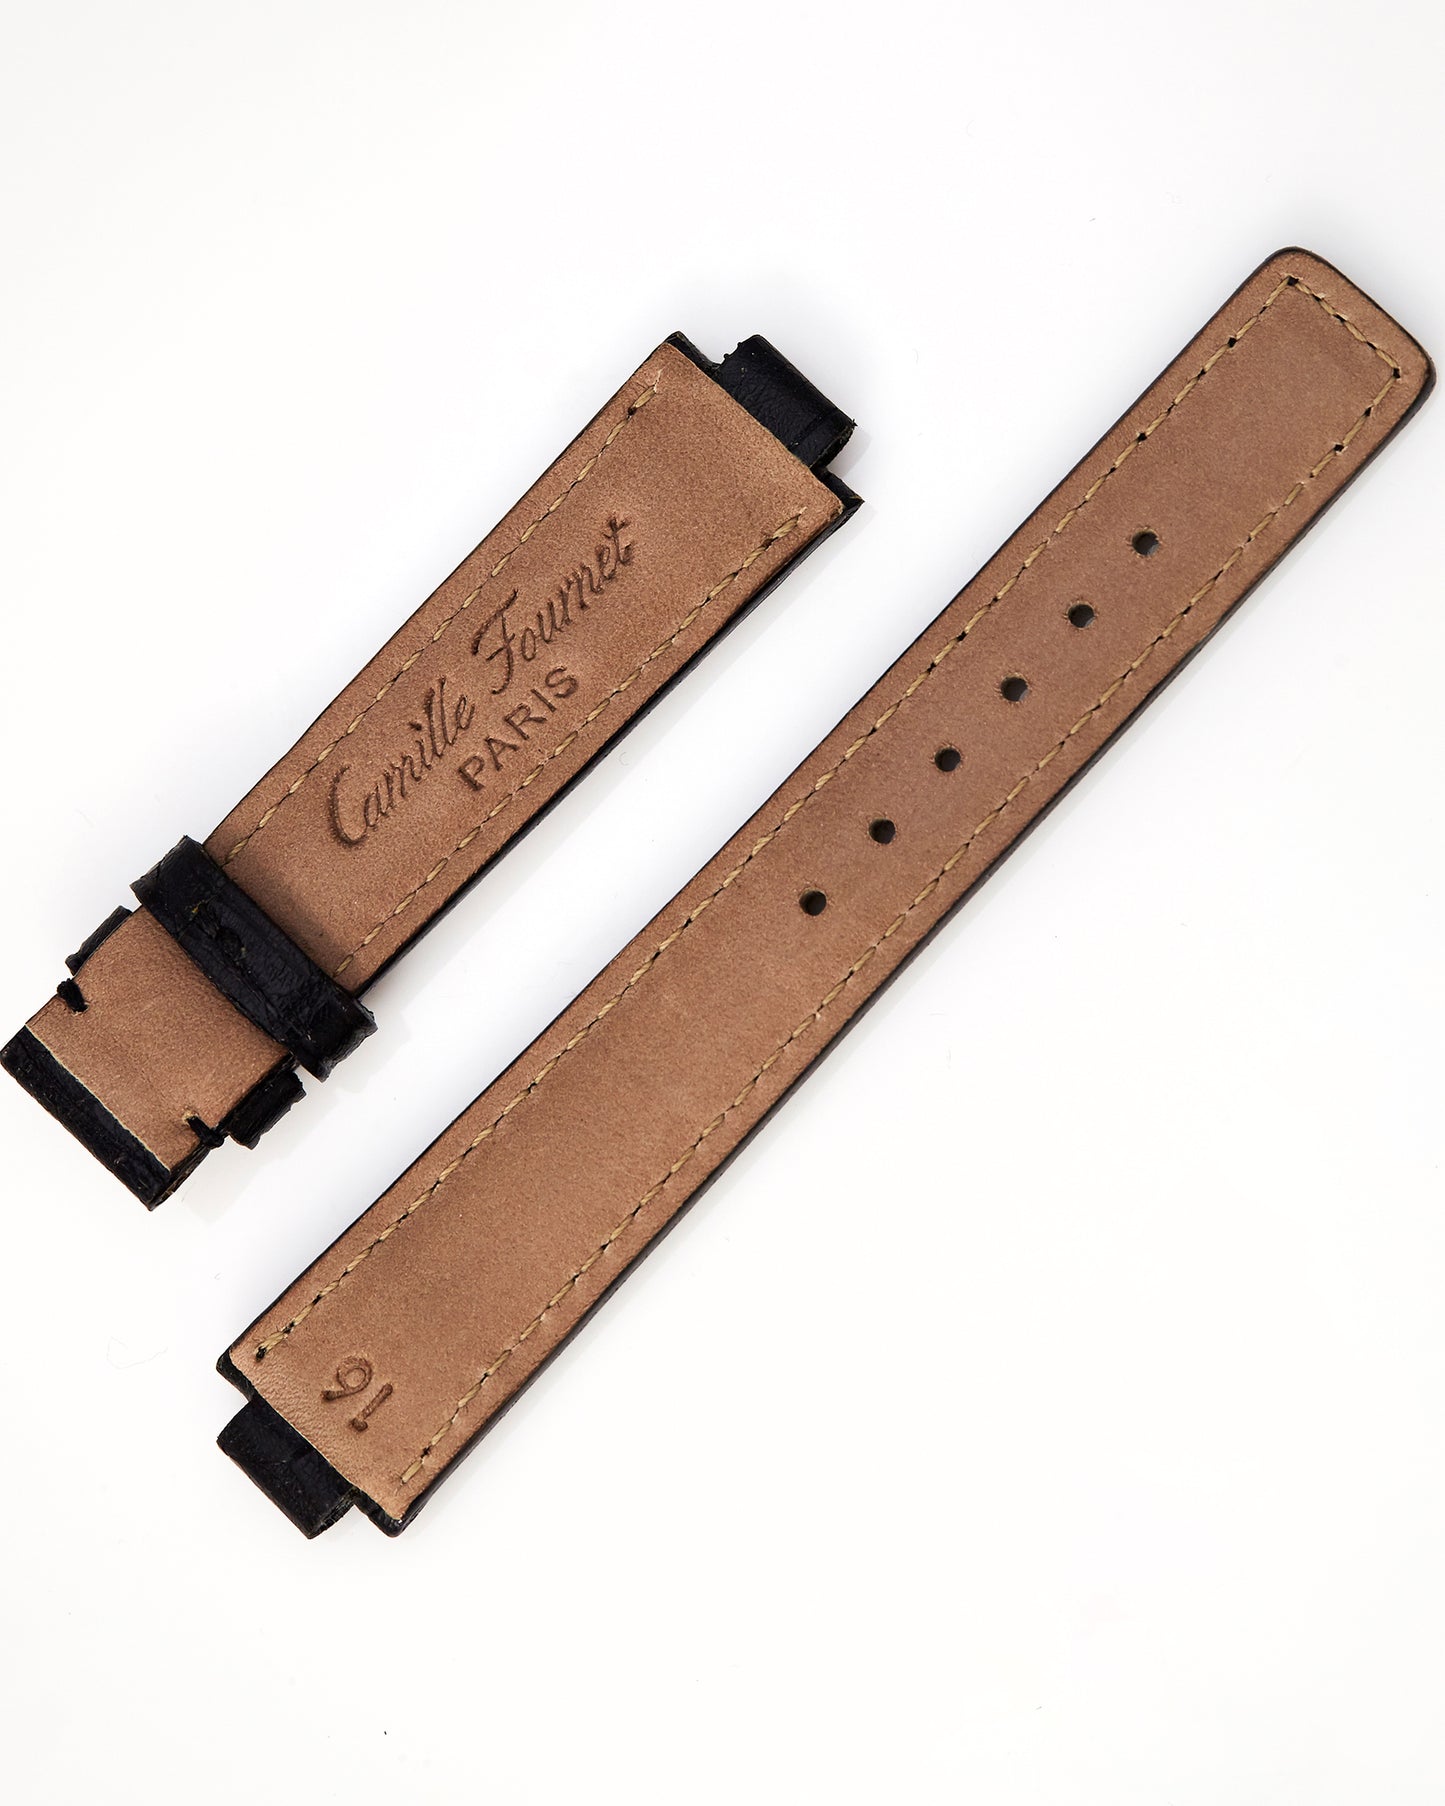 Clerc watchband to fit Model 806 by Camille Fournet Black Alligator Strap 16mm